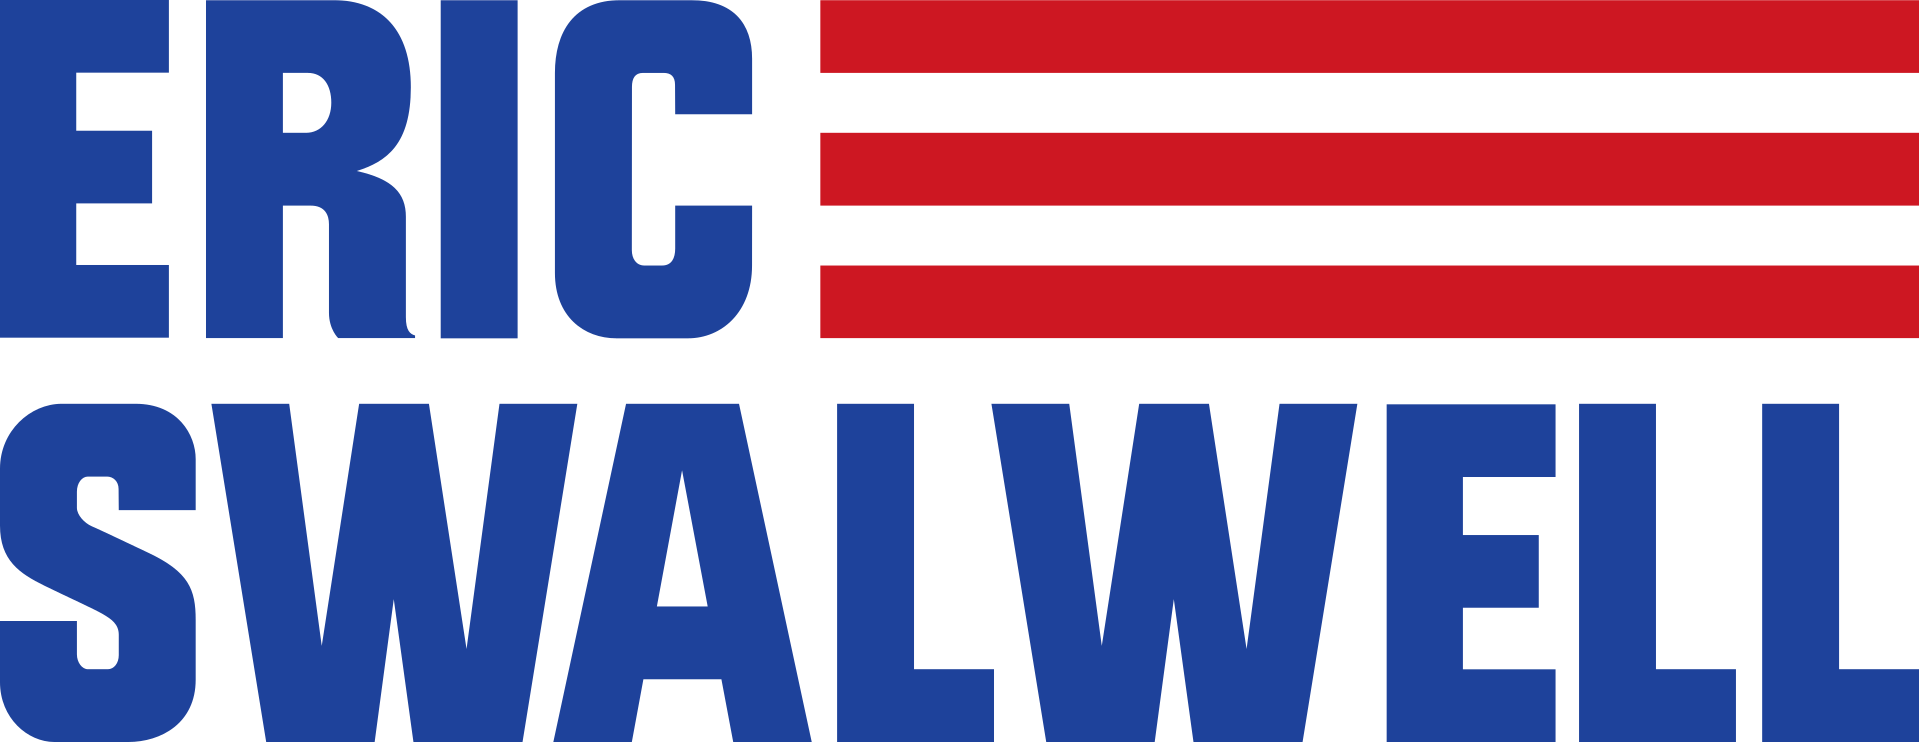 Inslee campaign logo